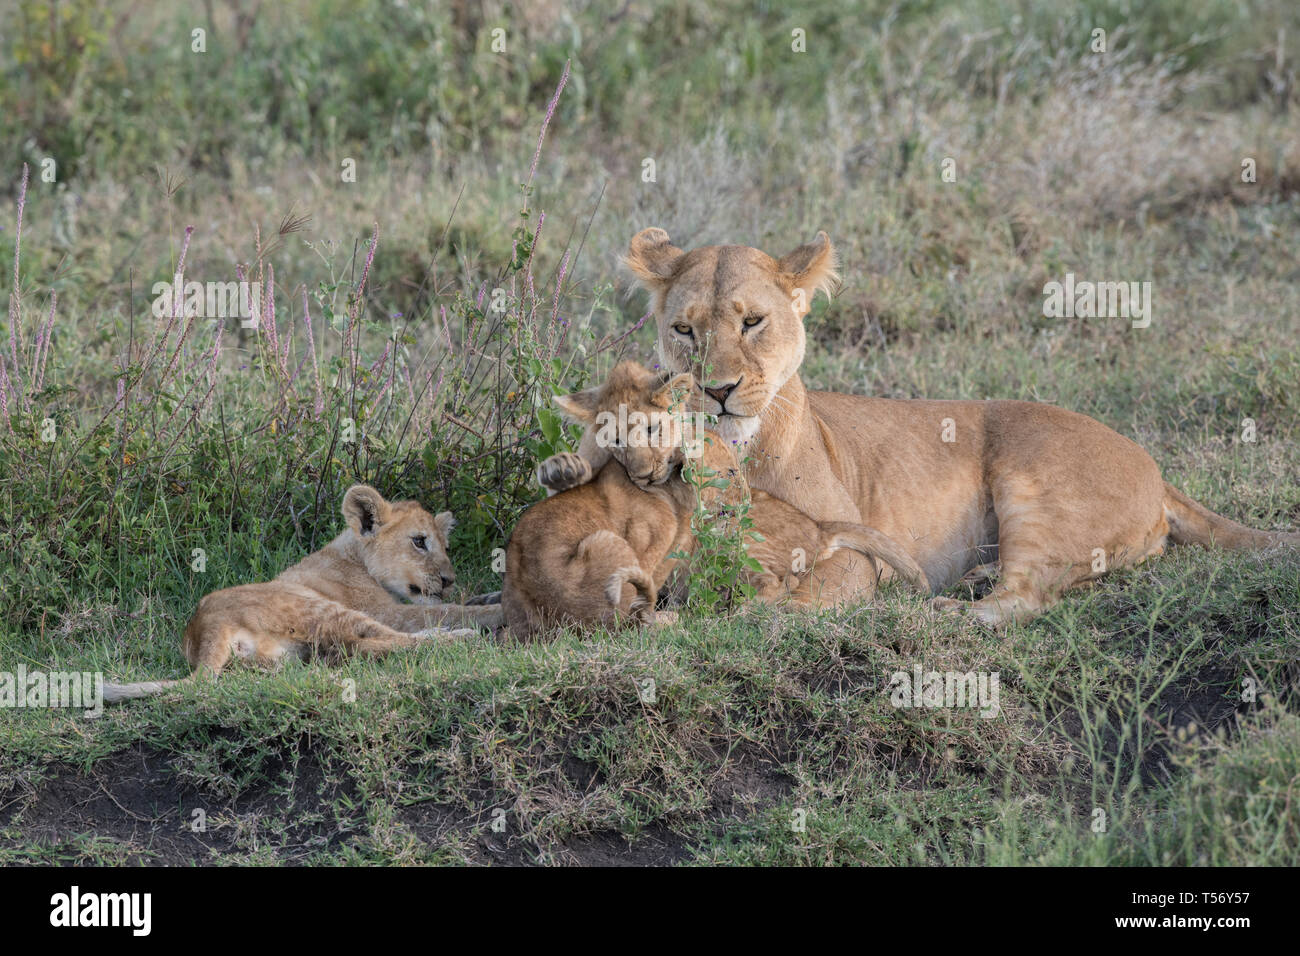 Lion cub resting with mother Stock Photo